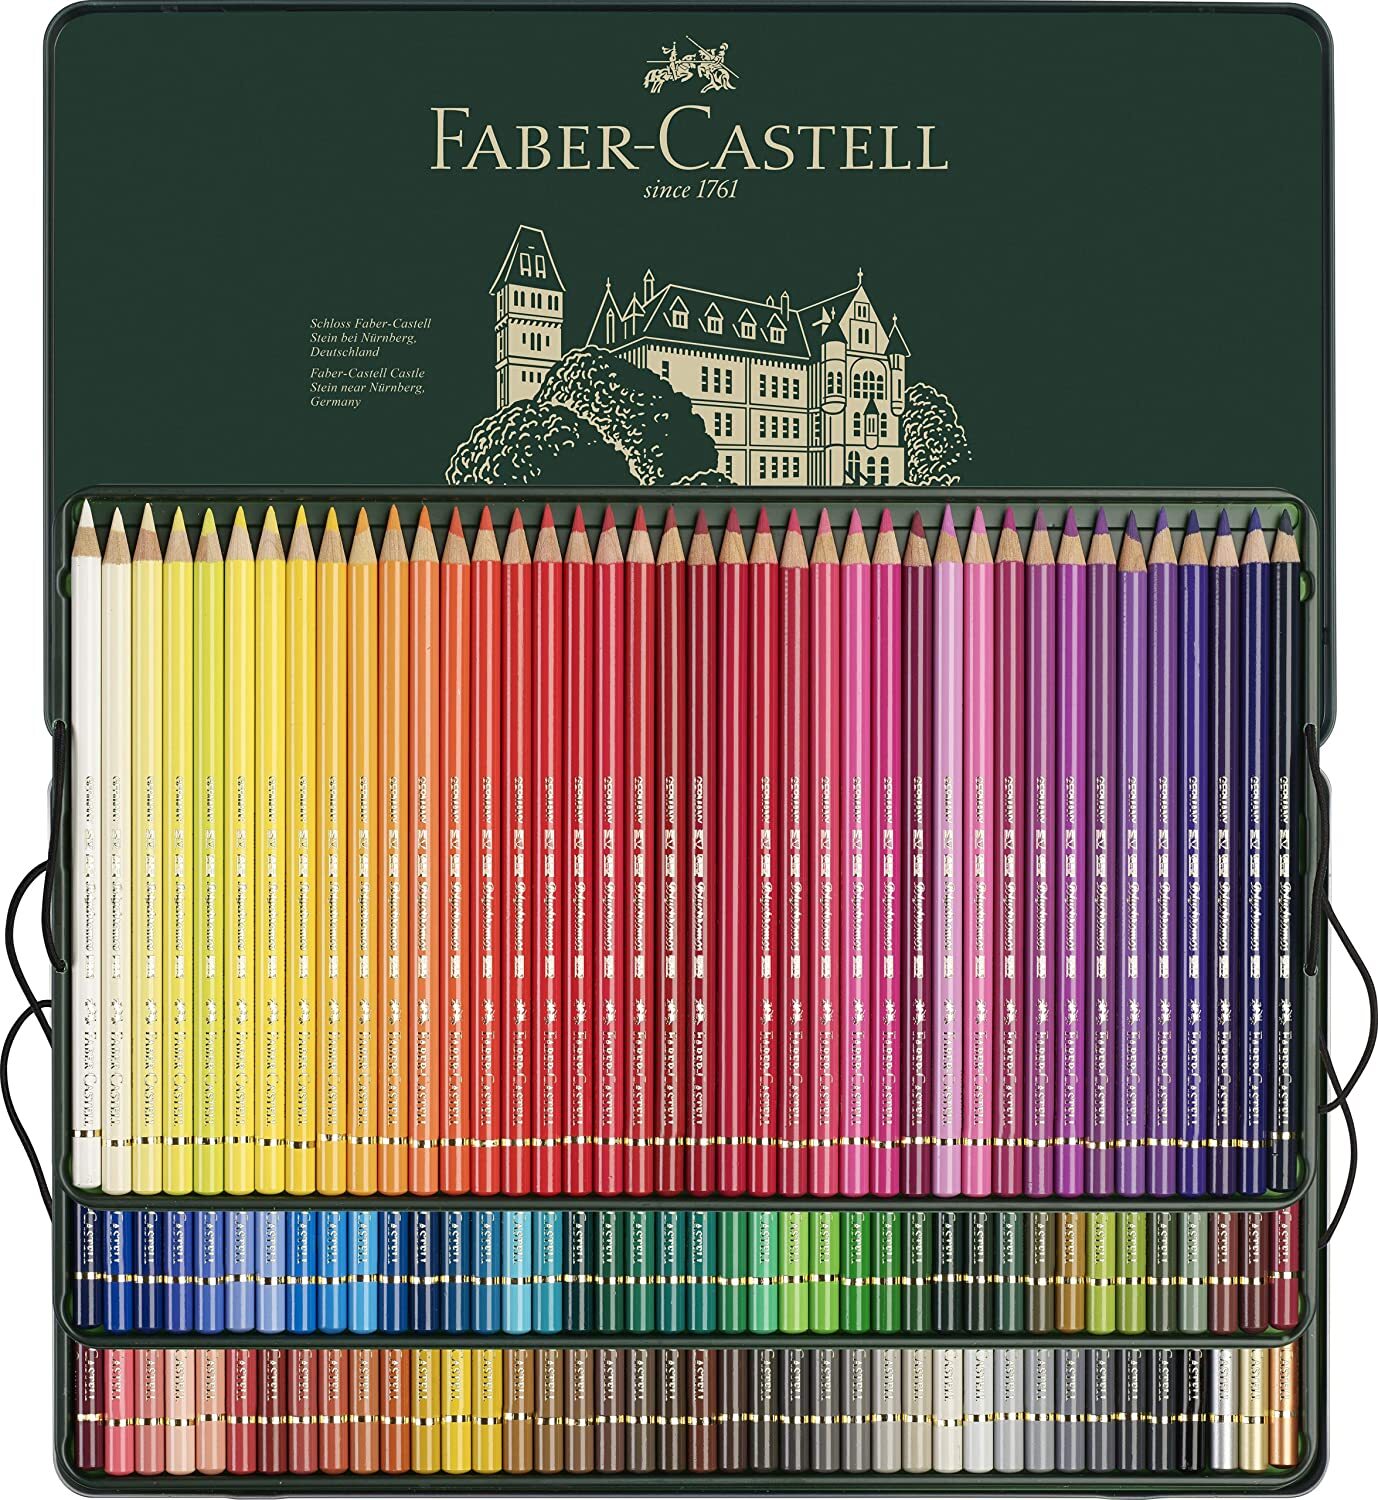 57 Simple Faber castell pencil crayons review for Beginner